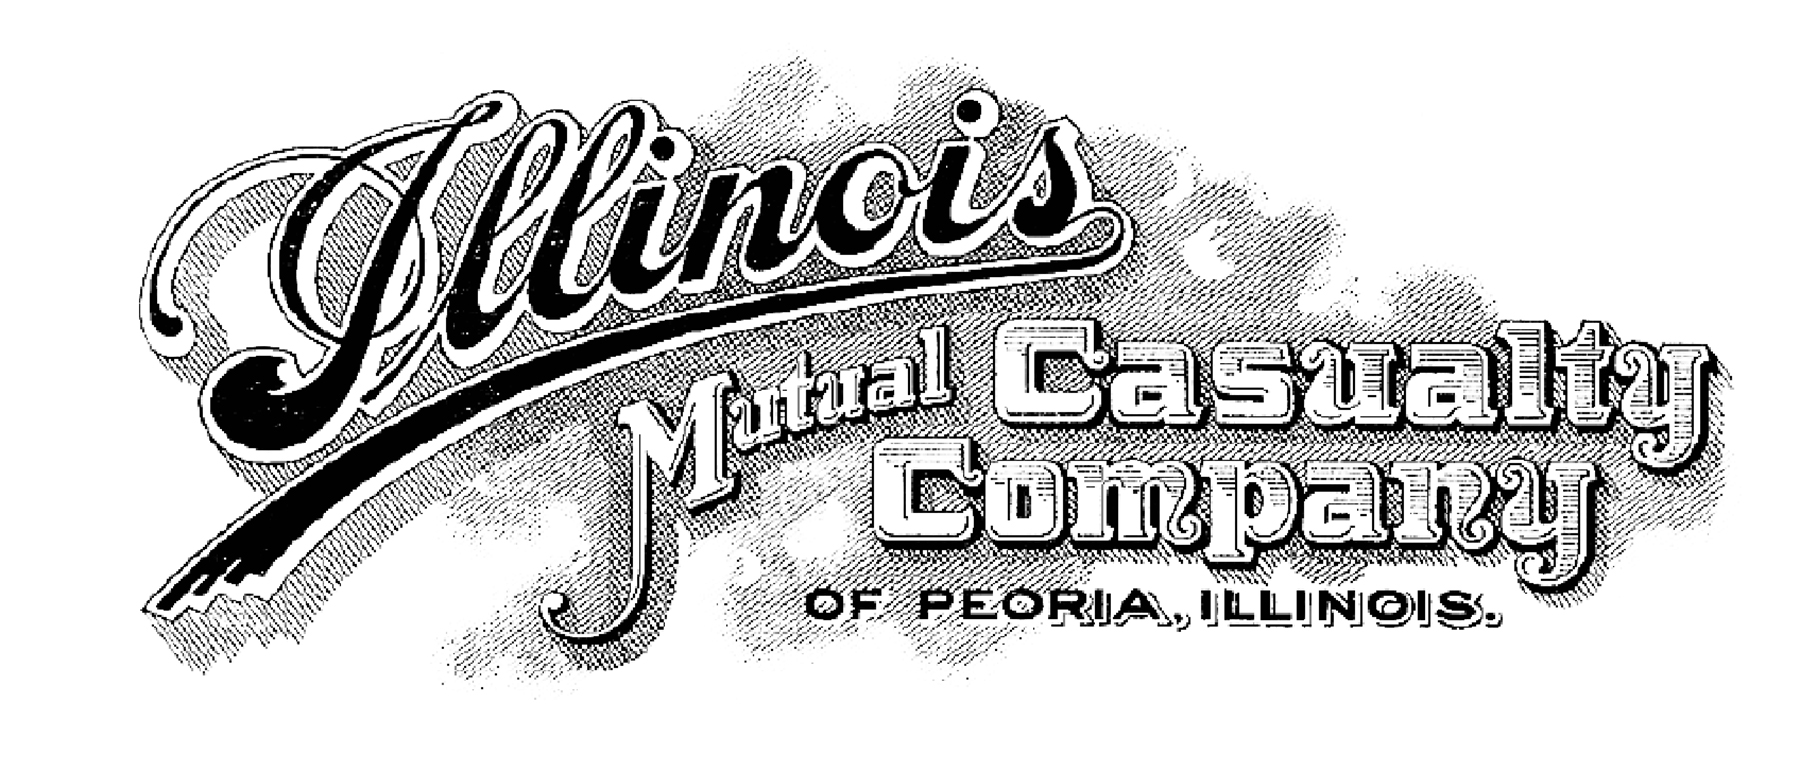 The logo for Illinois Mutual Casualty Company, renamed from Illinois Woodmen Accident Association.